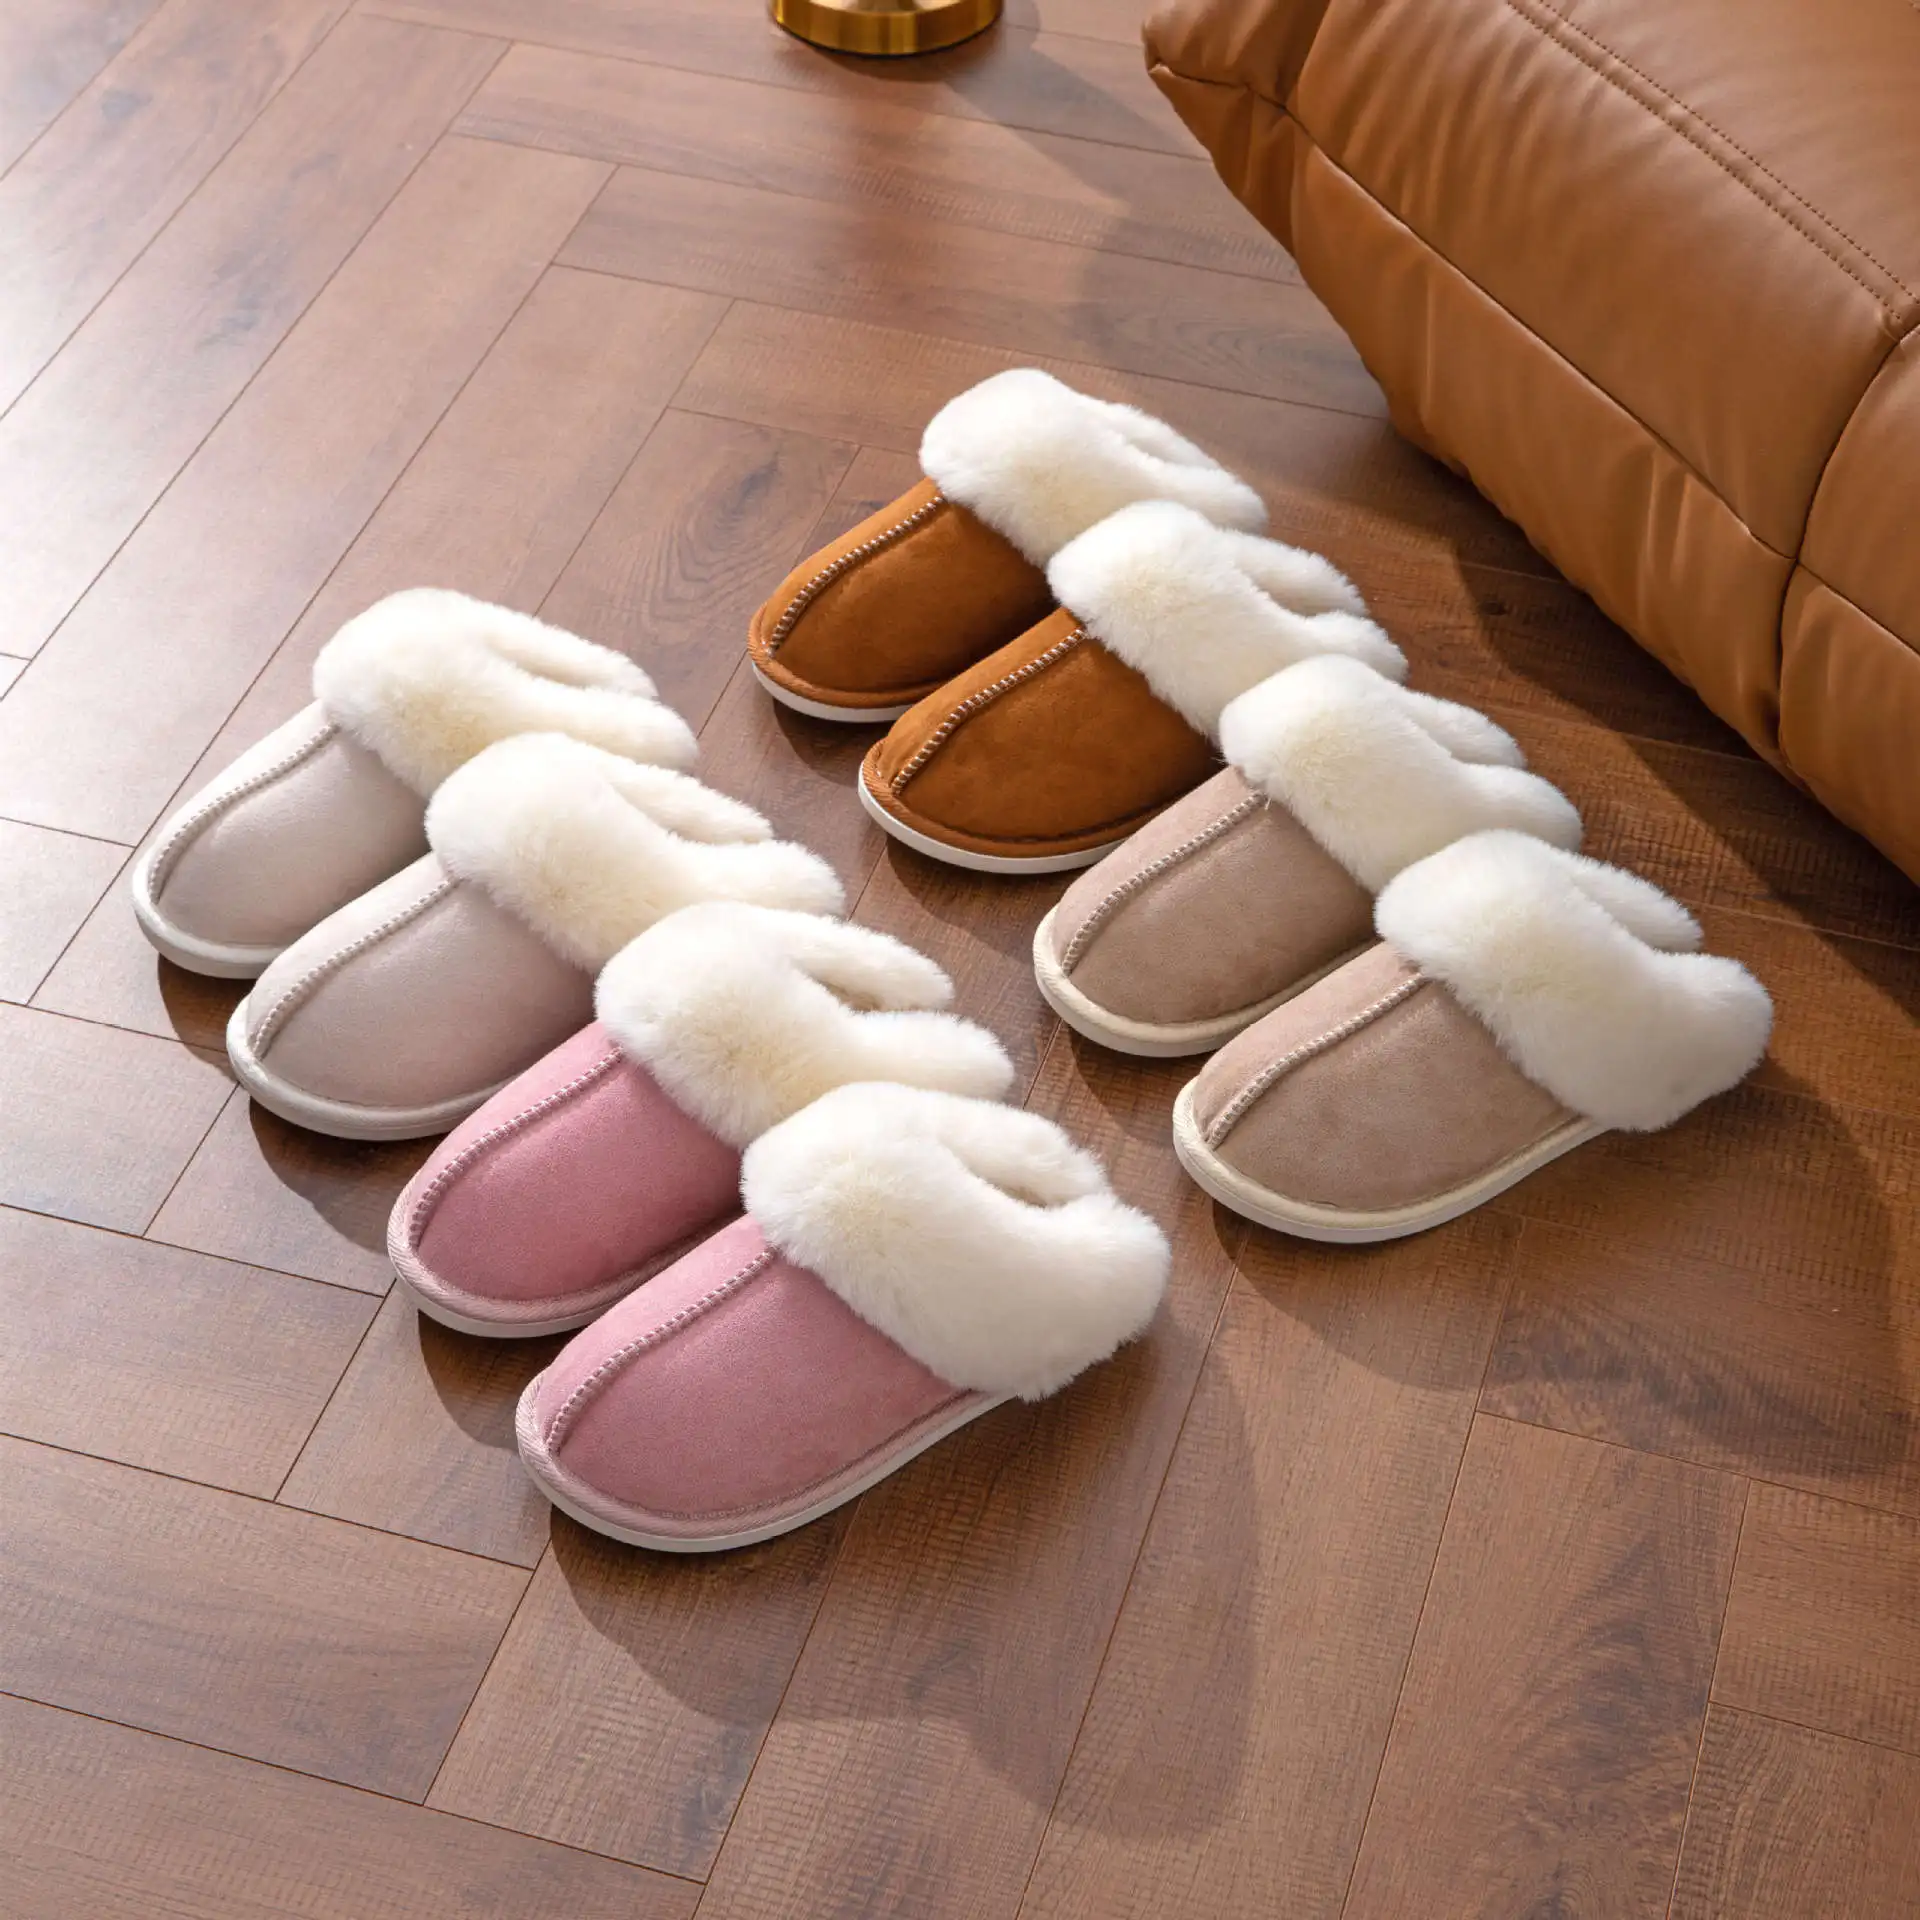 Comfortable Suede Leather House Shearling Slippers For Men And Women Fuzzy  Furry Horsebit Loafers For Indoor And Outdoor Use From Abc_sneakers8,  $61.56 | DHgate.Com